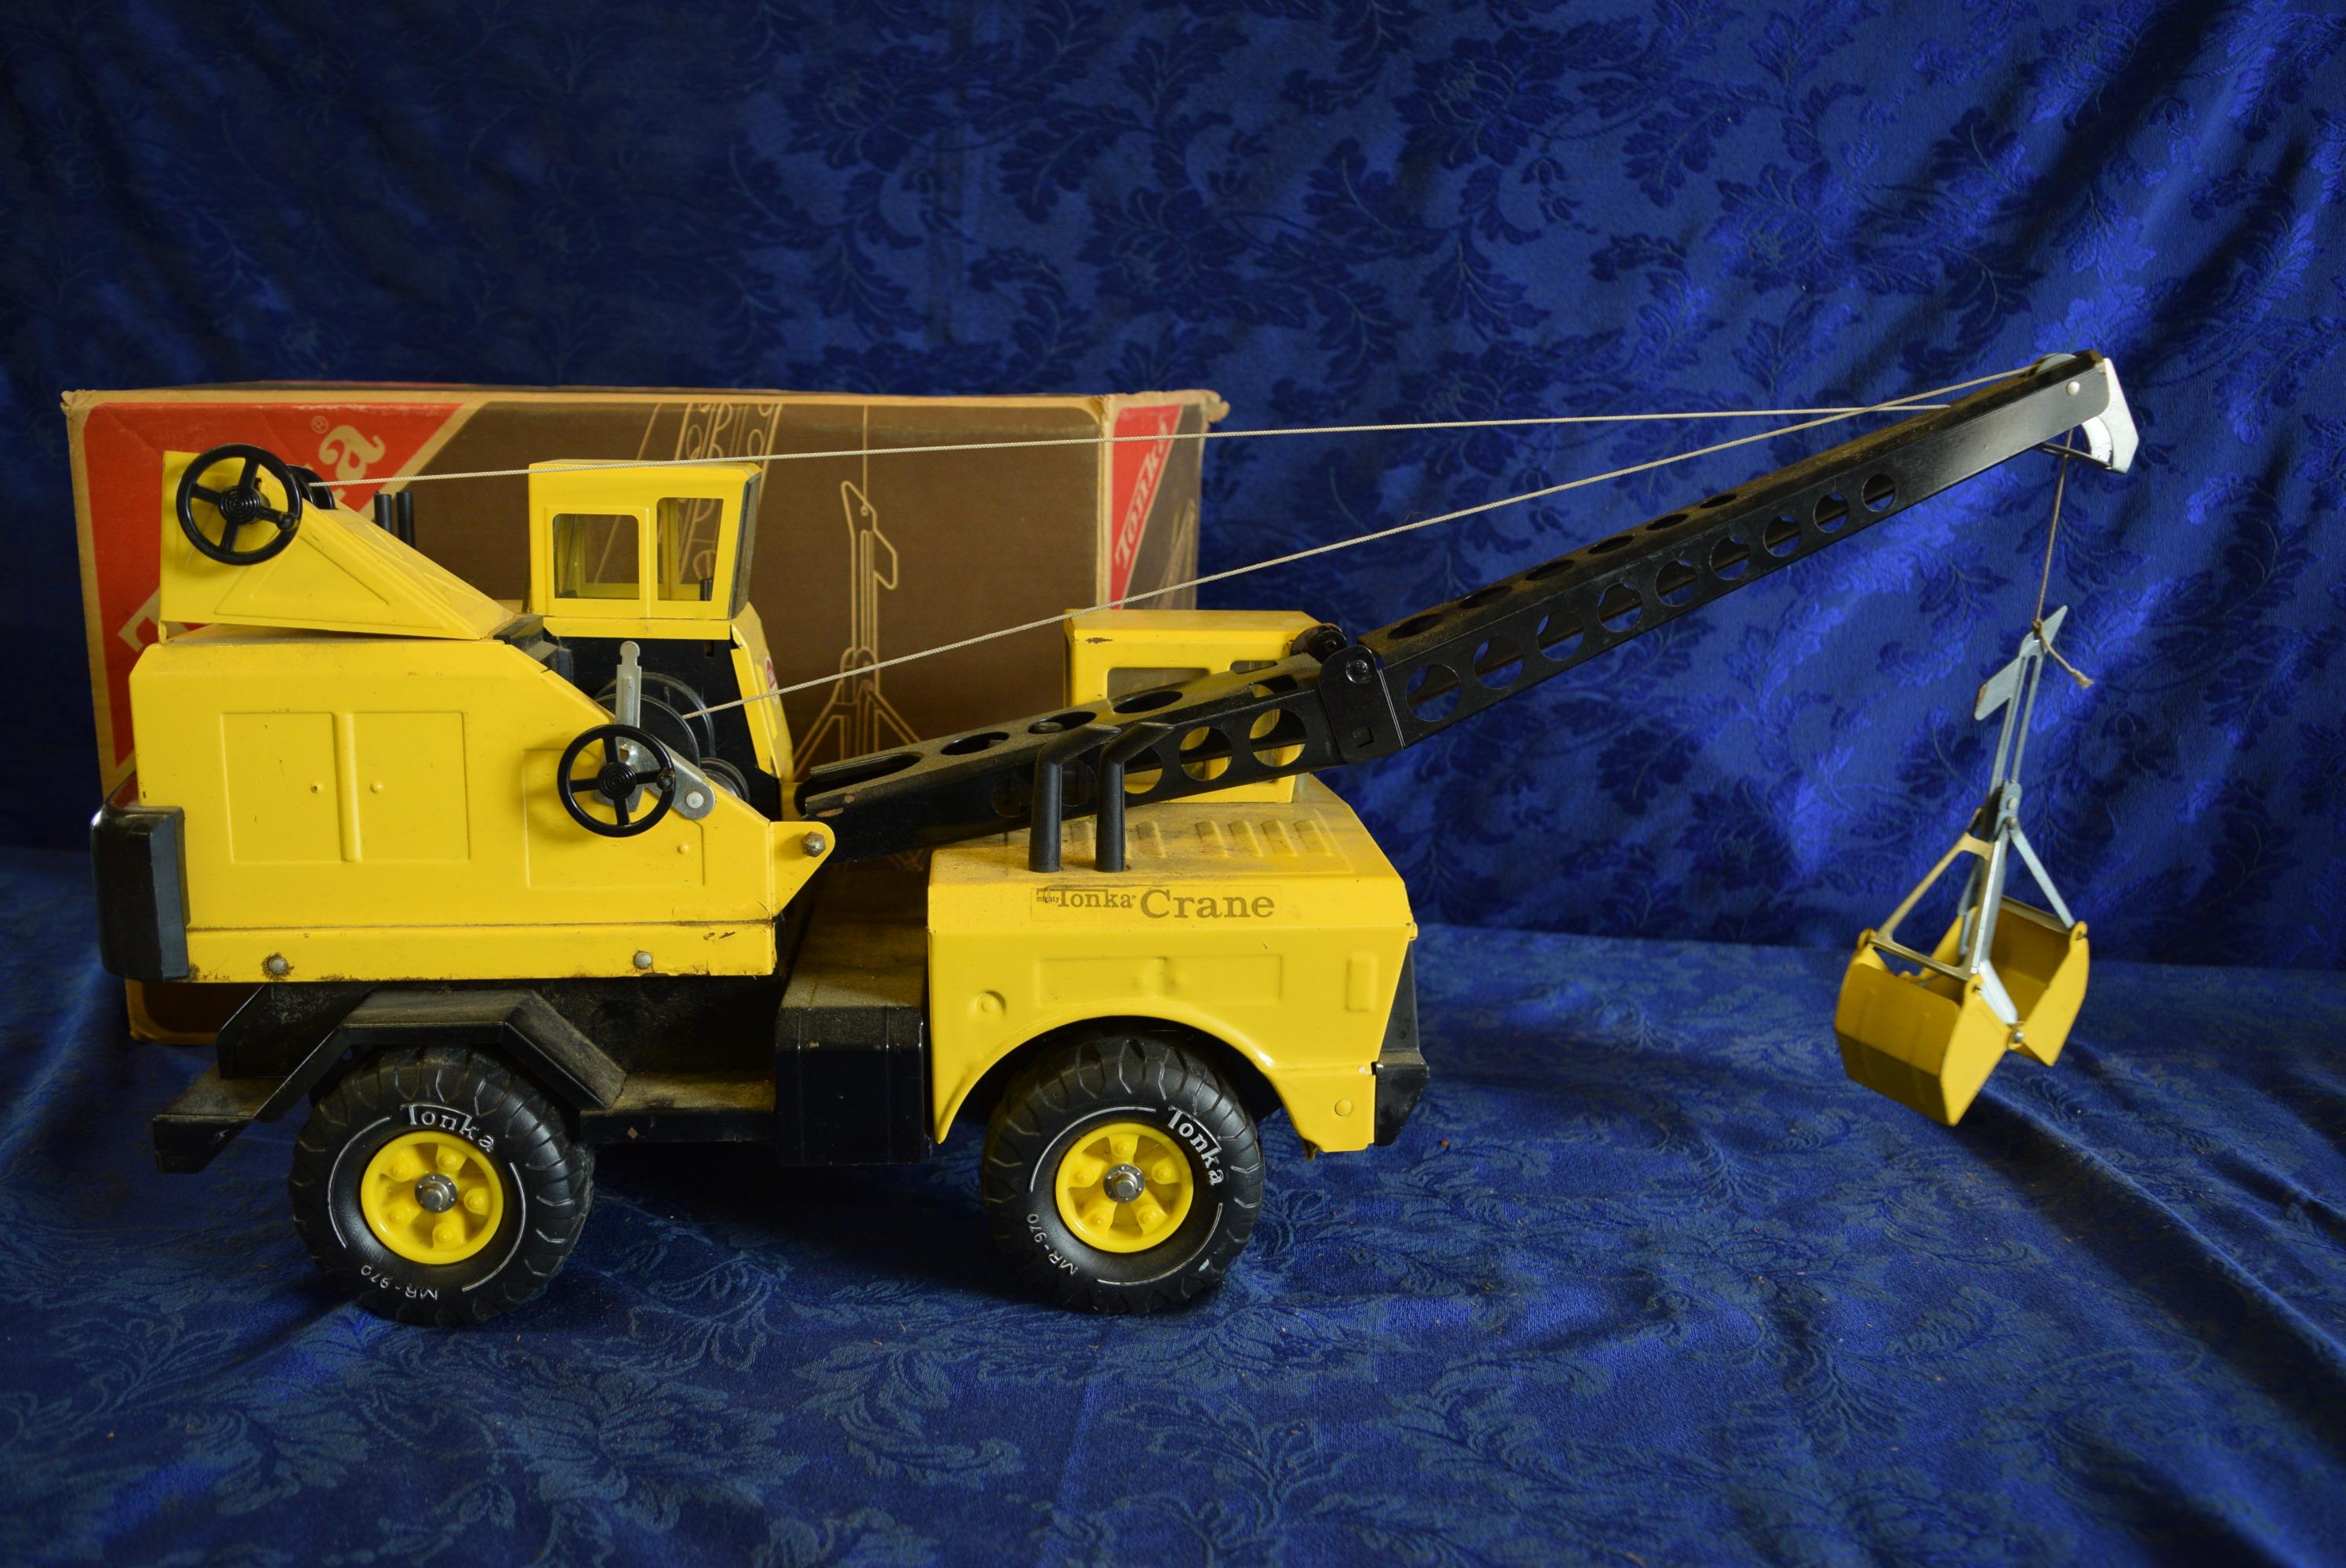 THE ONE AND ONLY TONKA CRANE!